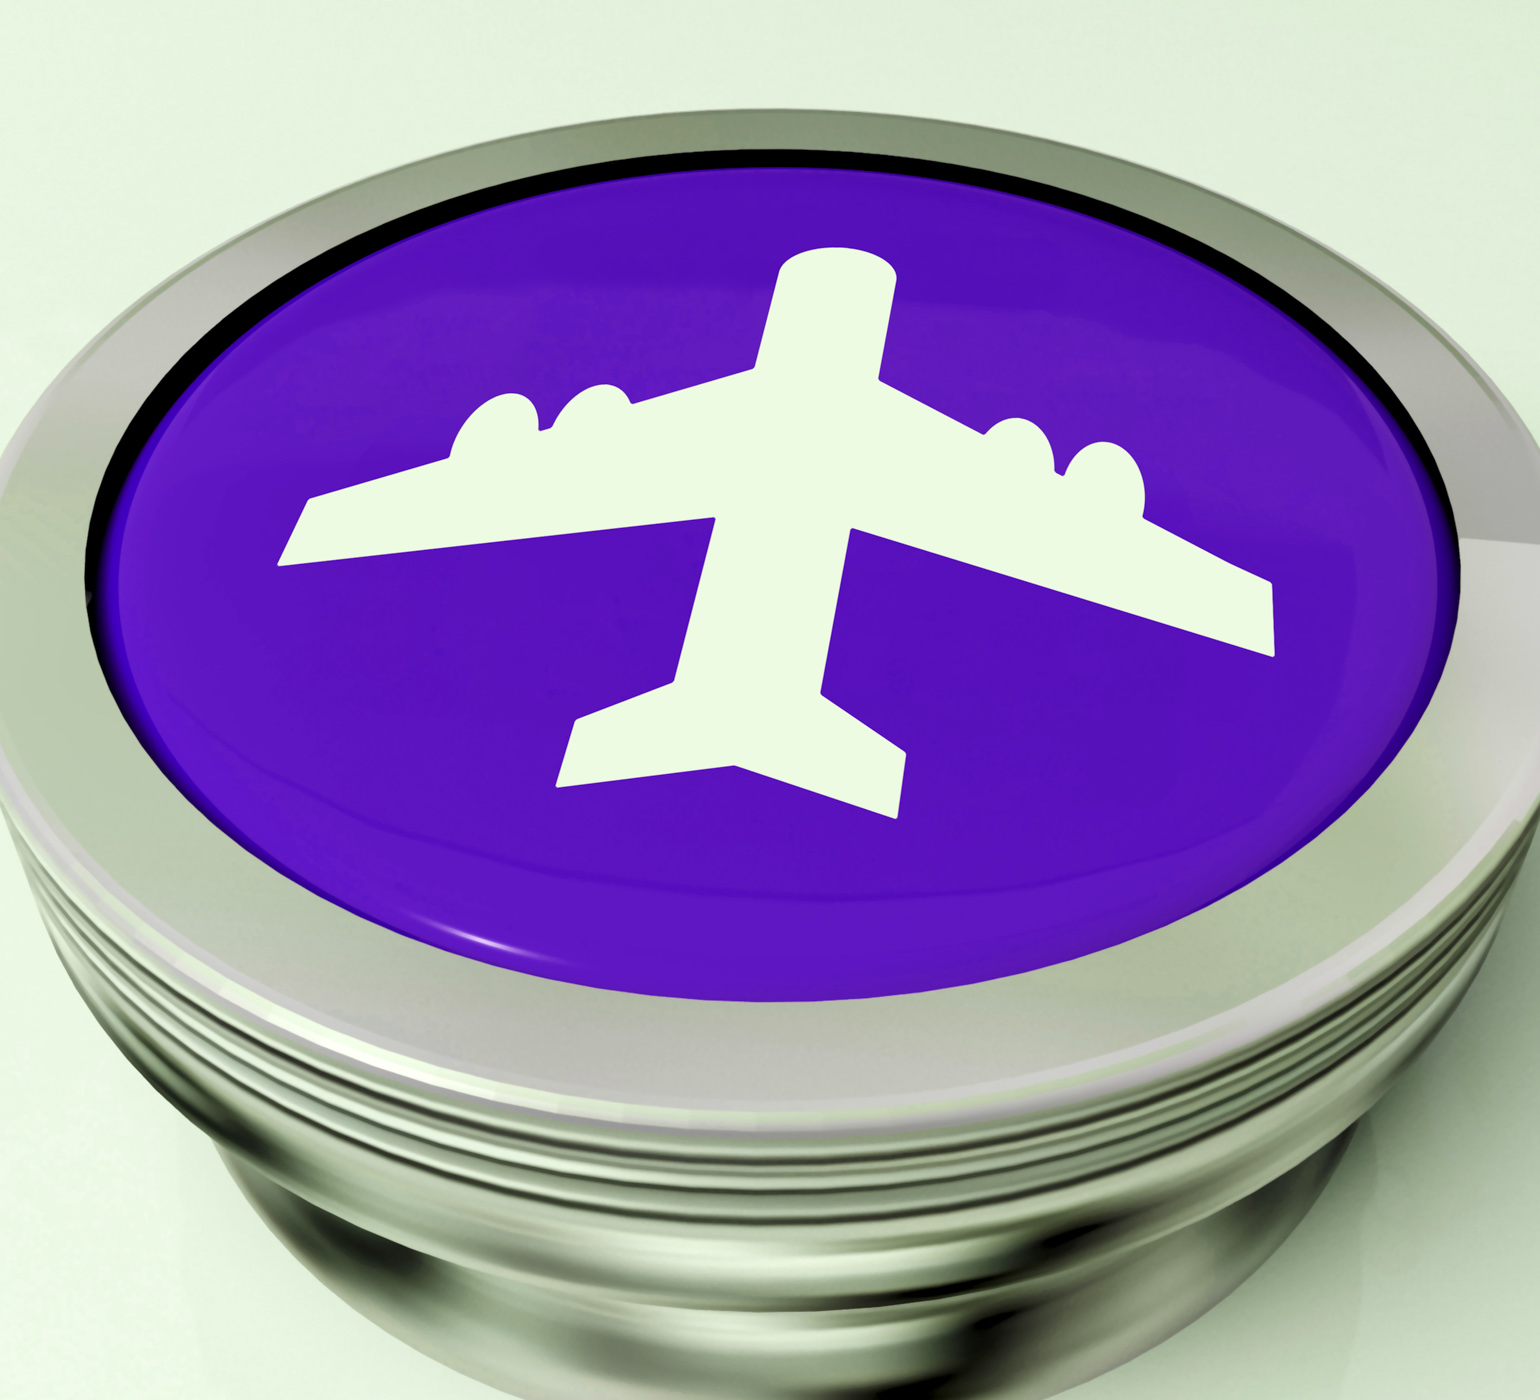 Plane Switch Means Travel Or Vacation, Fly, Travel, Transportation, Transport, HQ Photo